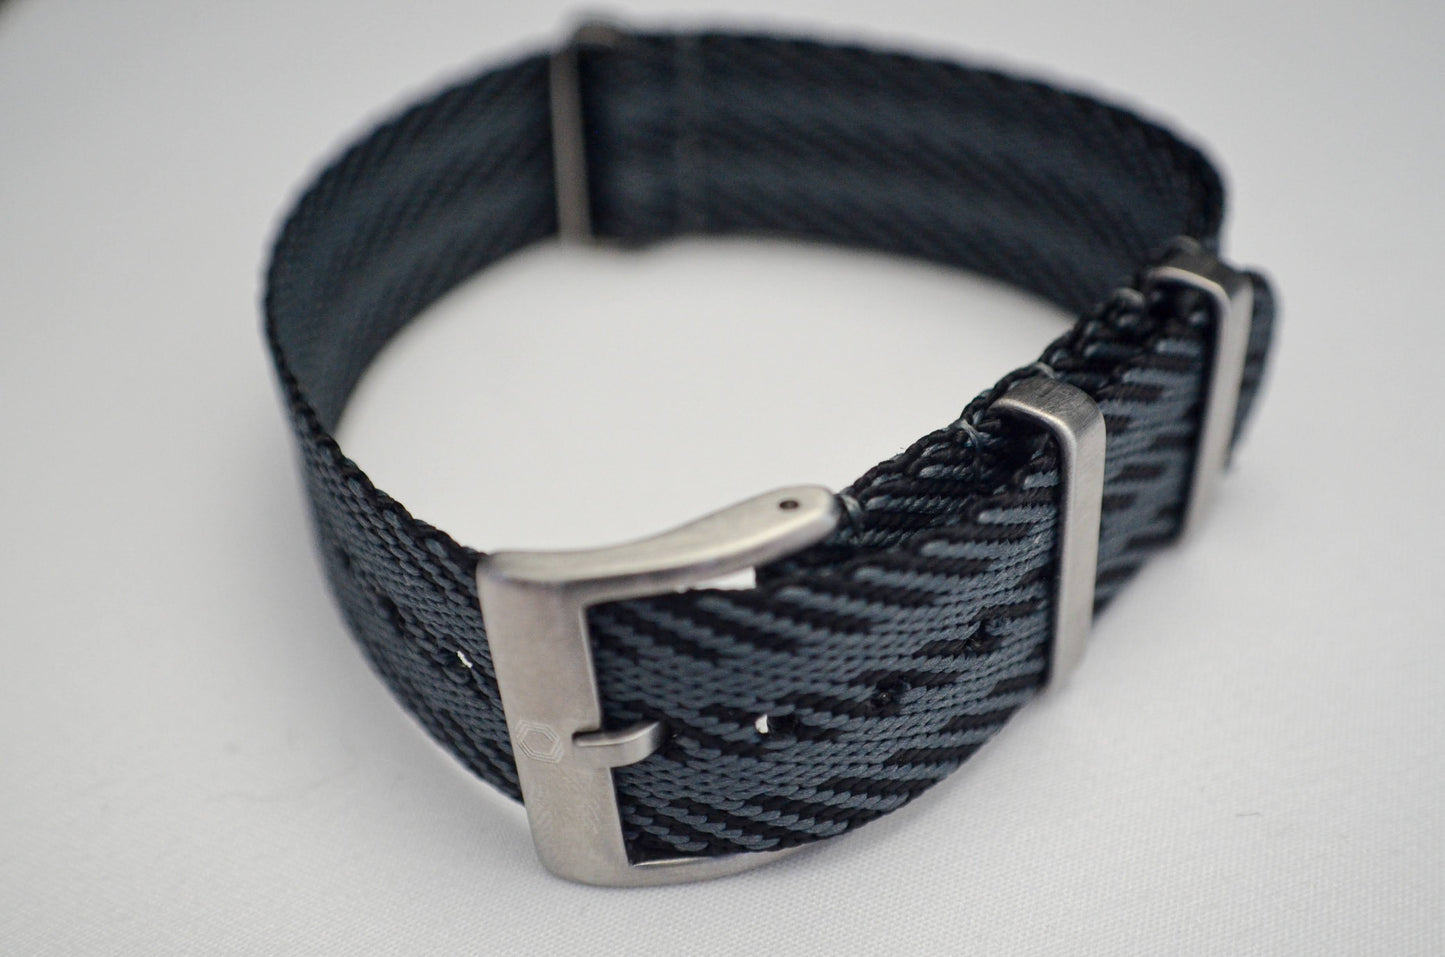 The 'St. James' - Traditional 'Bond' military watch strap made of a soft double weaved nylon